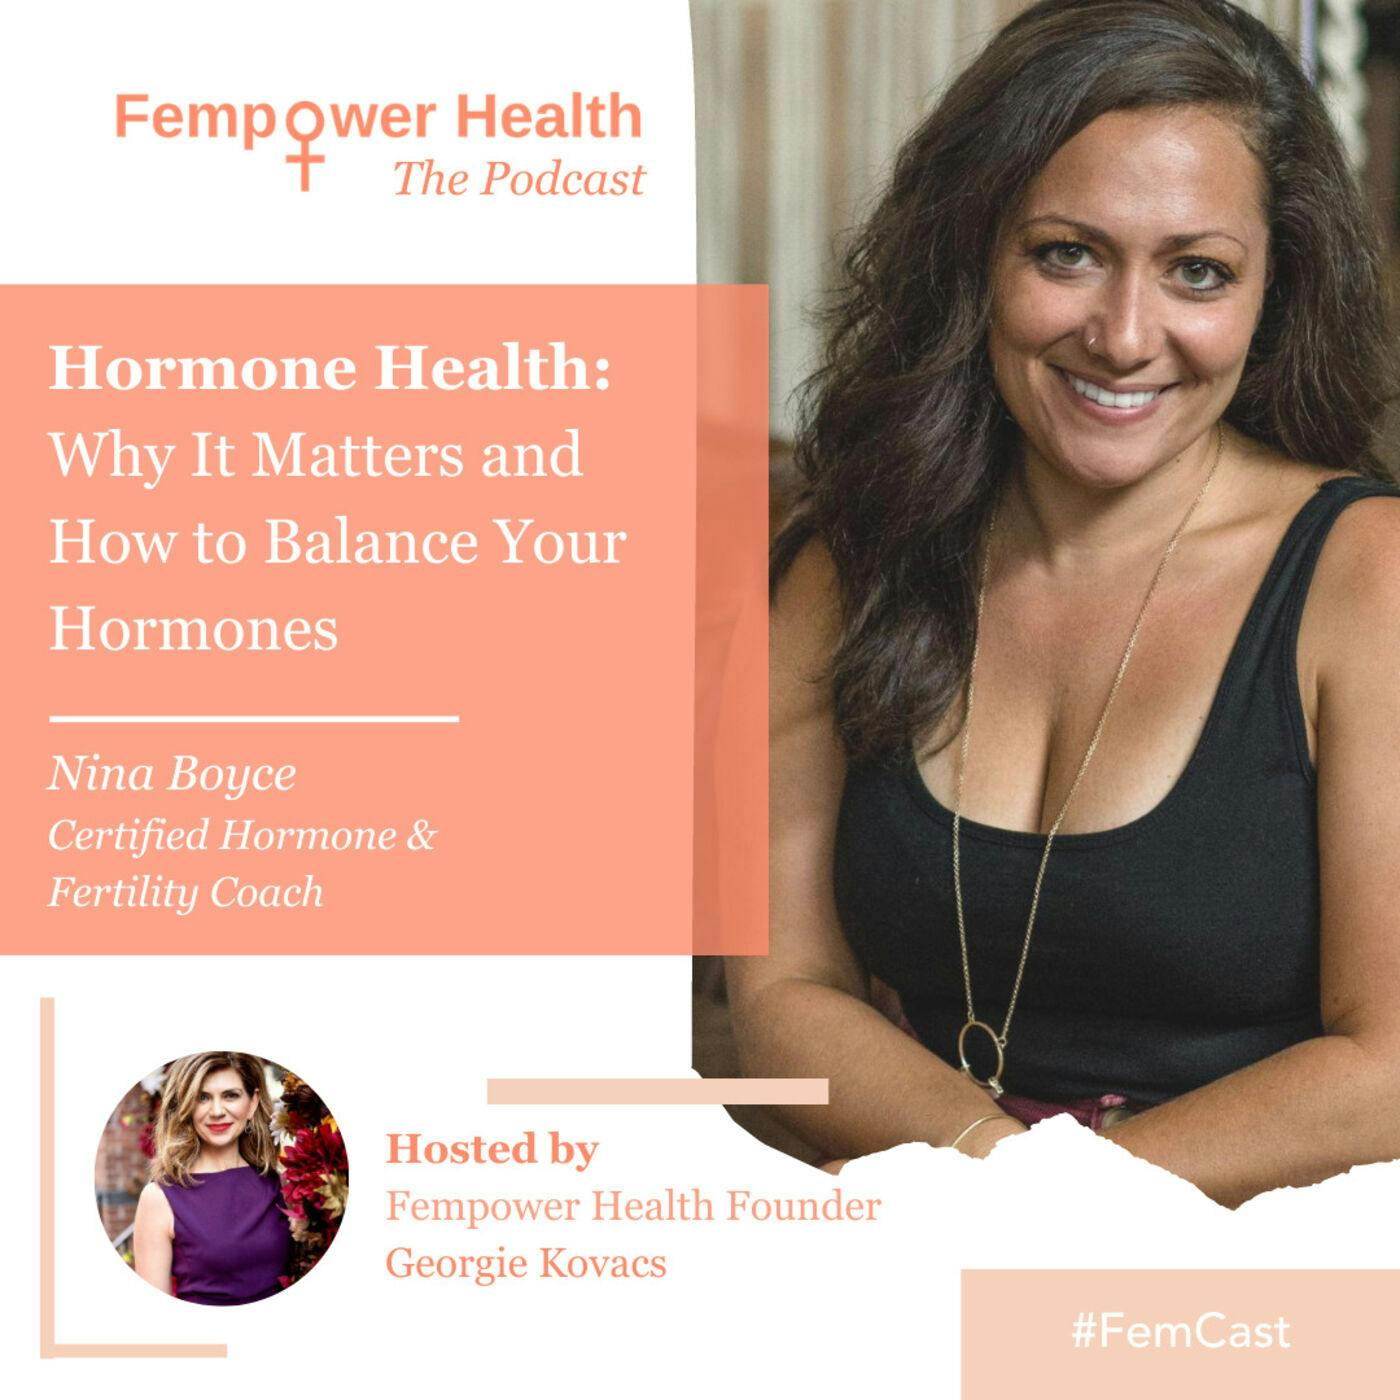 Nina Boyce | Hormone Health: Why It Matters and How to Balance Your Hormones